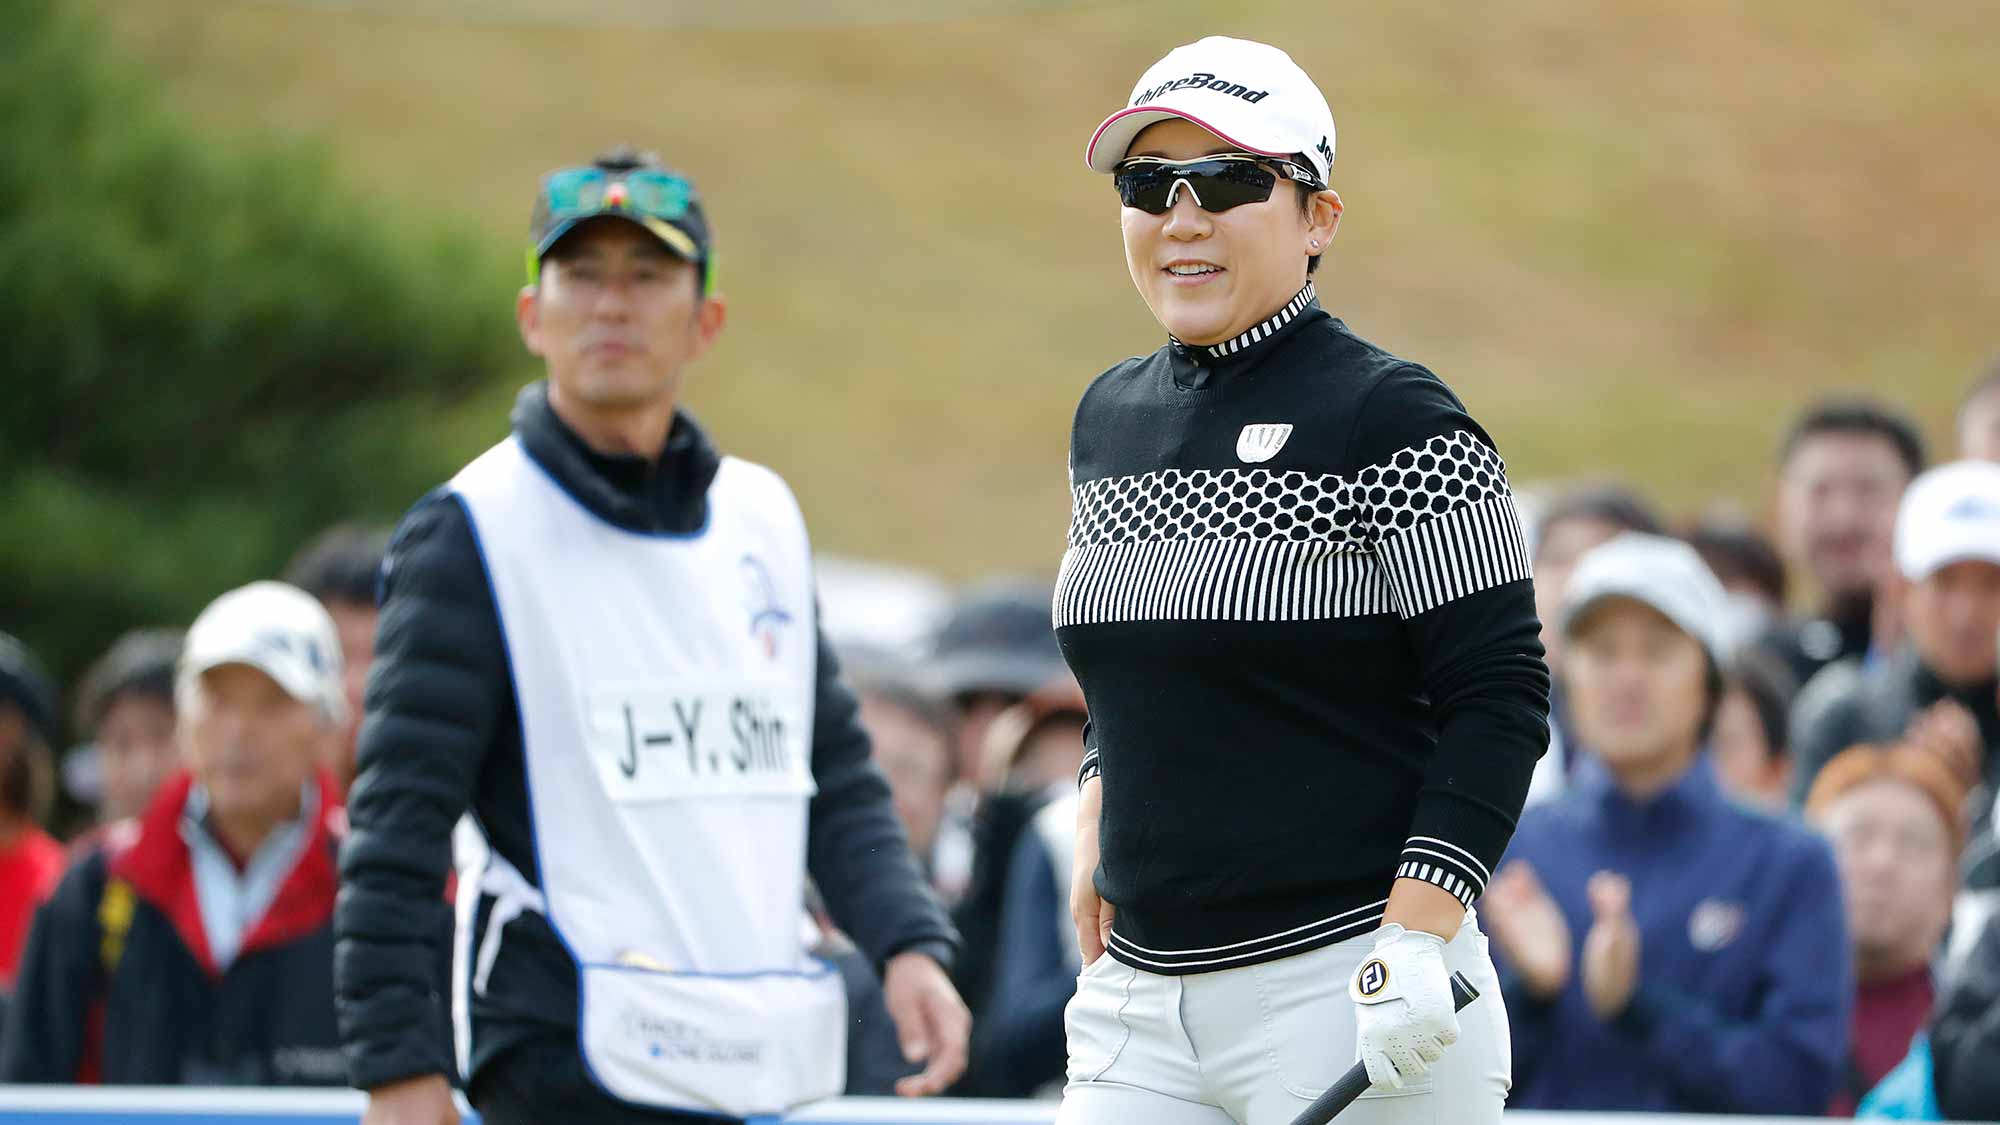 Jiyai Shin of South Korea watches on the first hole during the first round of the TOTO Japan Classic at Seta Golf Course on November 02, 2018 in Otsu, Shiga, Japan